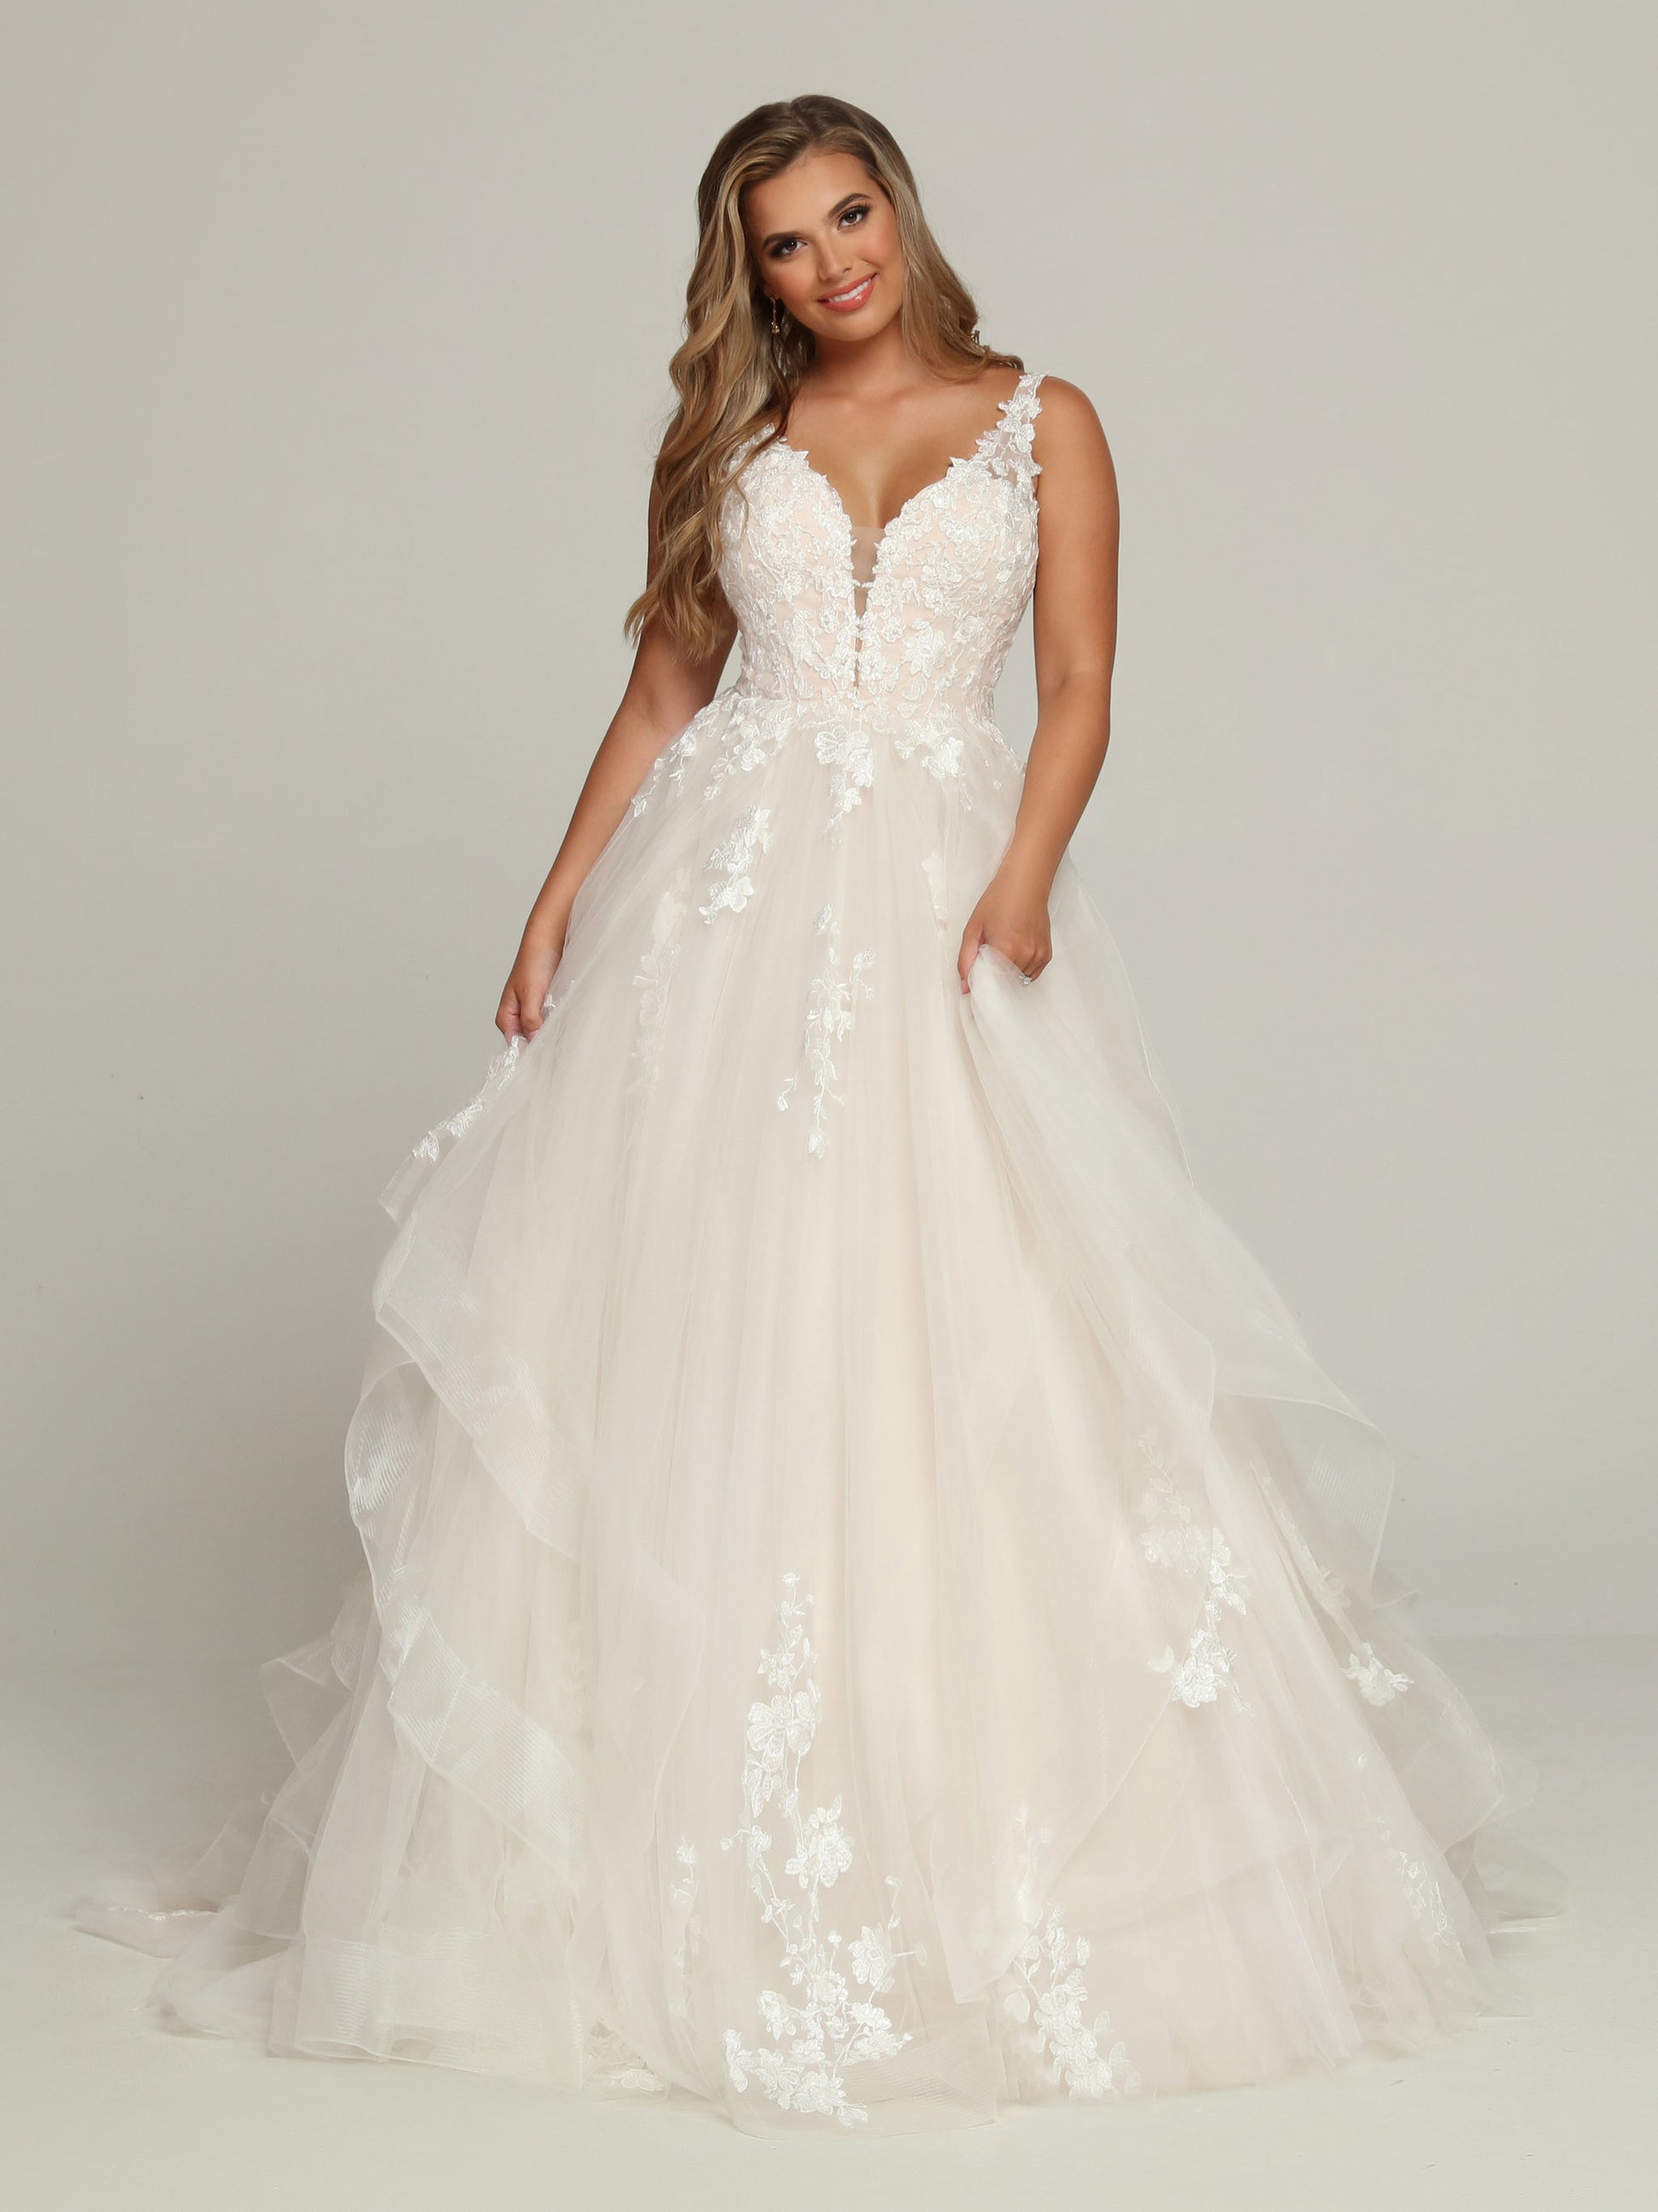 Davinci Bridal 50695 A Line Ruffle Layer Ballgown Wedding Dress Lace V Neck Bridal Gown Straight out of a Fairytale, this Lace & Tulle A-Line Ball Gown Wedding Dress features a Plunging Sweetheart V-Neckline with Modesty Panel & Low V-Back. Lace Covers the Bodice Front & Highlights the Straps & Sheer Back. The Full Tulle Skirt with Chapel Train has Tiered Layers with Lace Medallion Accents. Covered Buttons Hide the Zipper Closure.